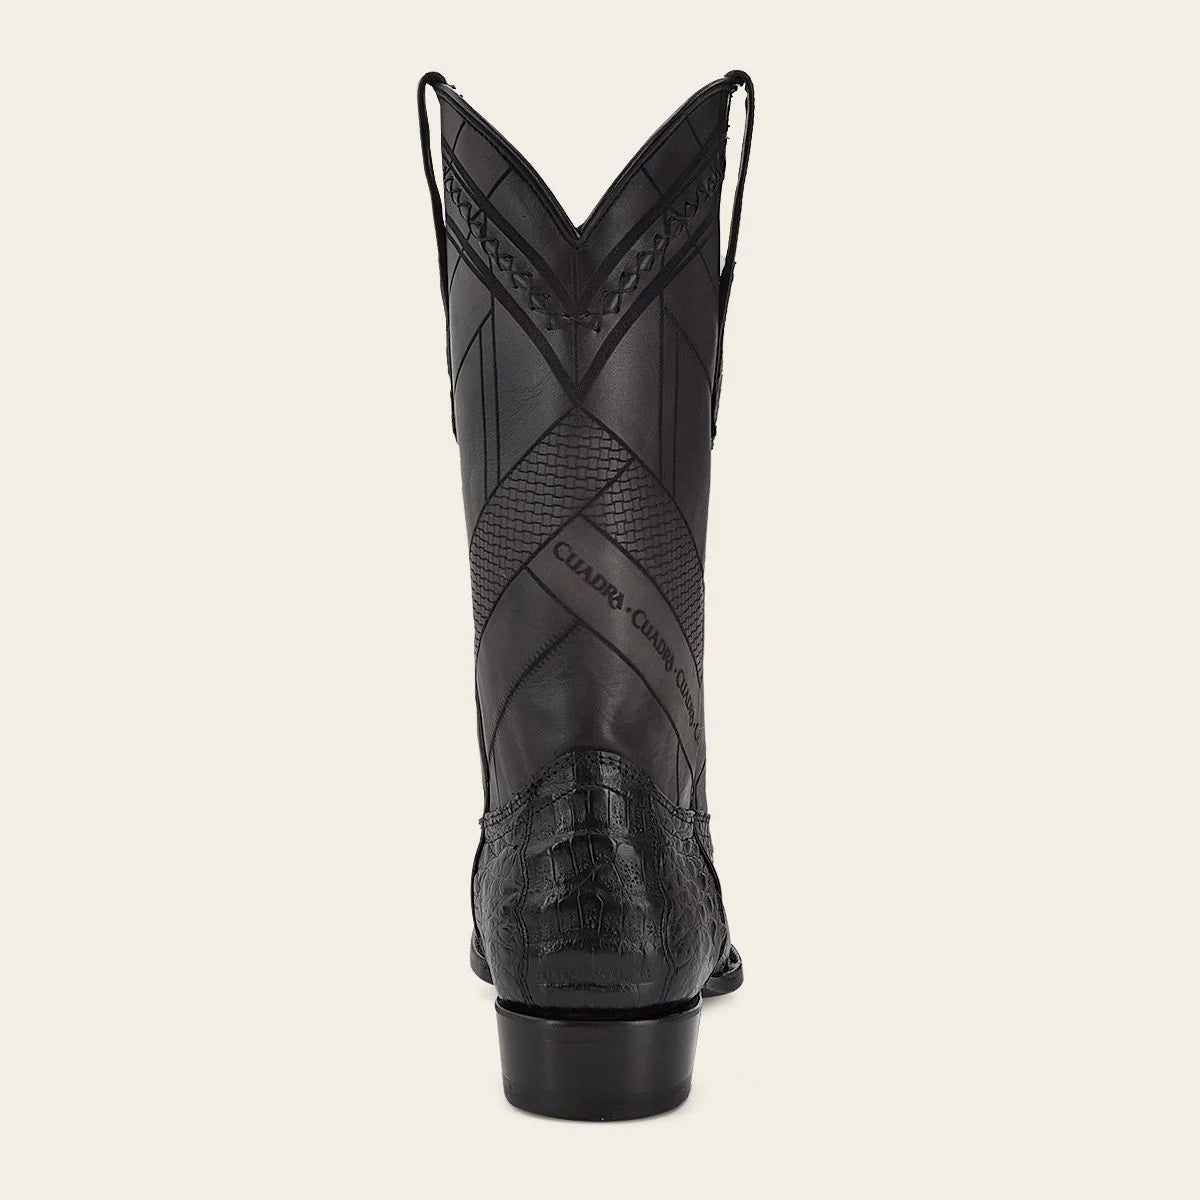 Geometrical engraved black cayman leather boot